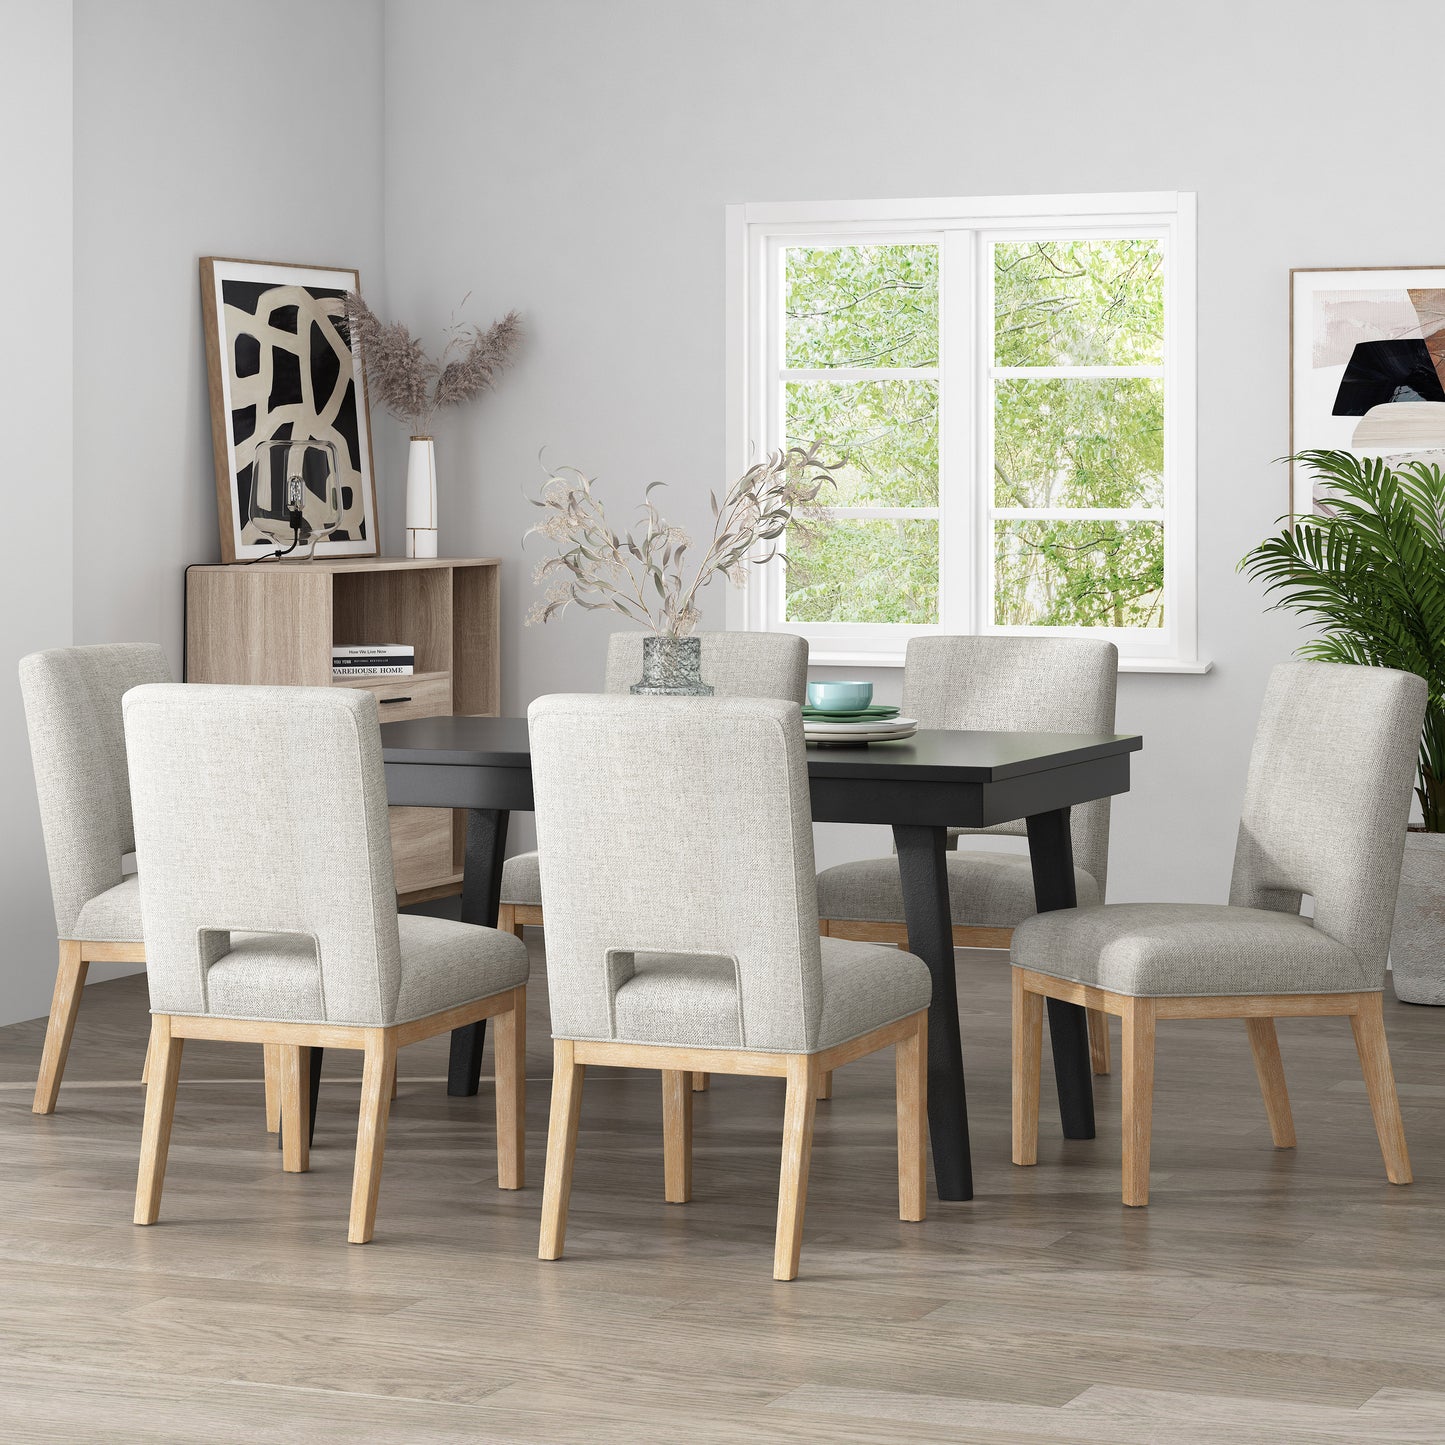 Parkey Upholstered Dining Chairs, Set of 6